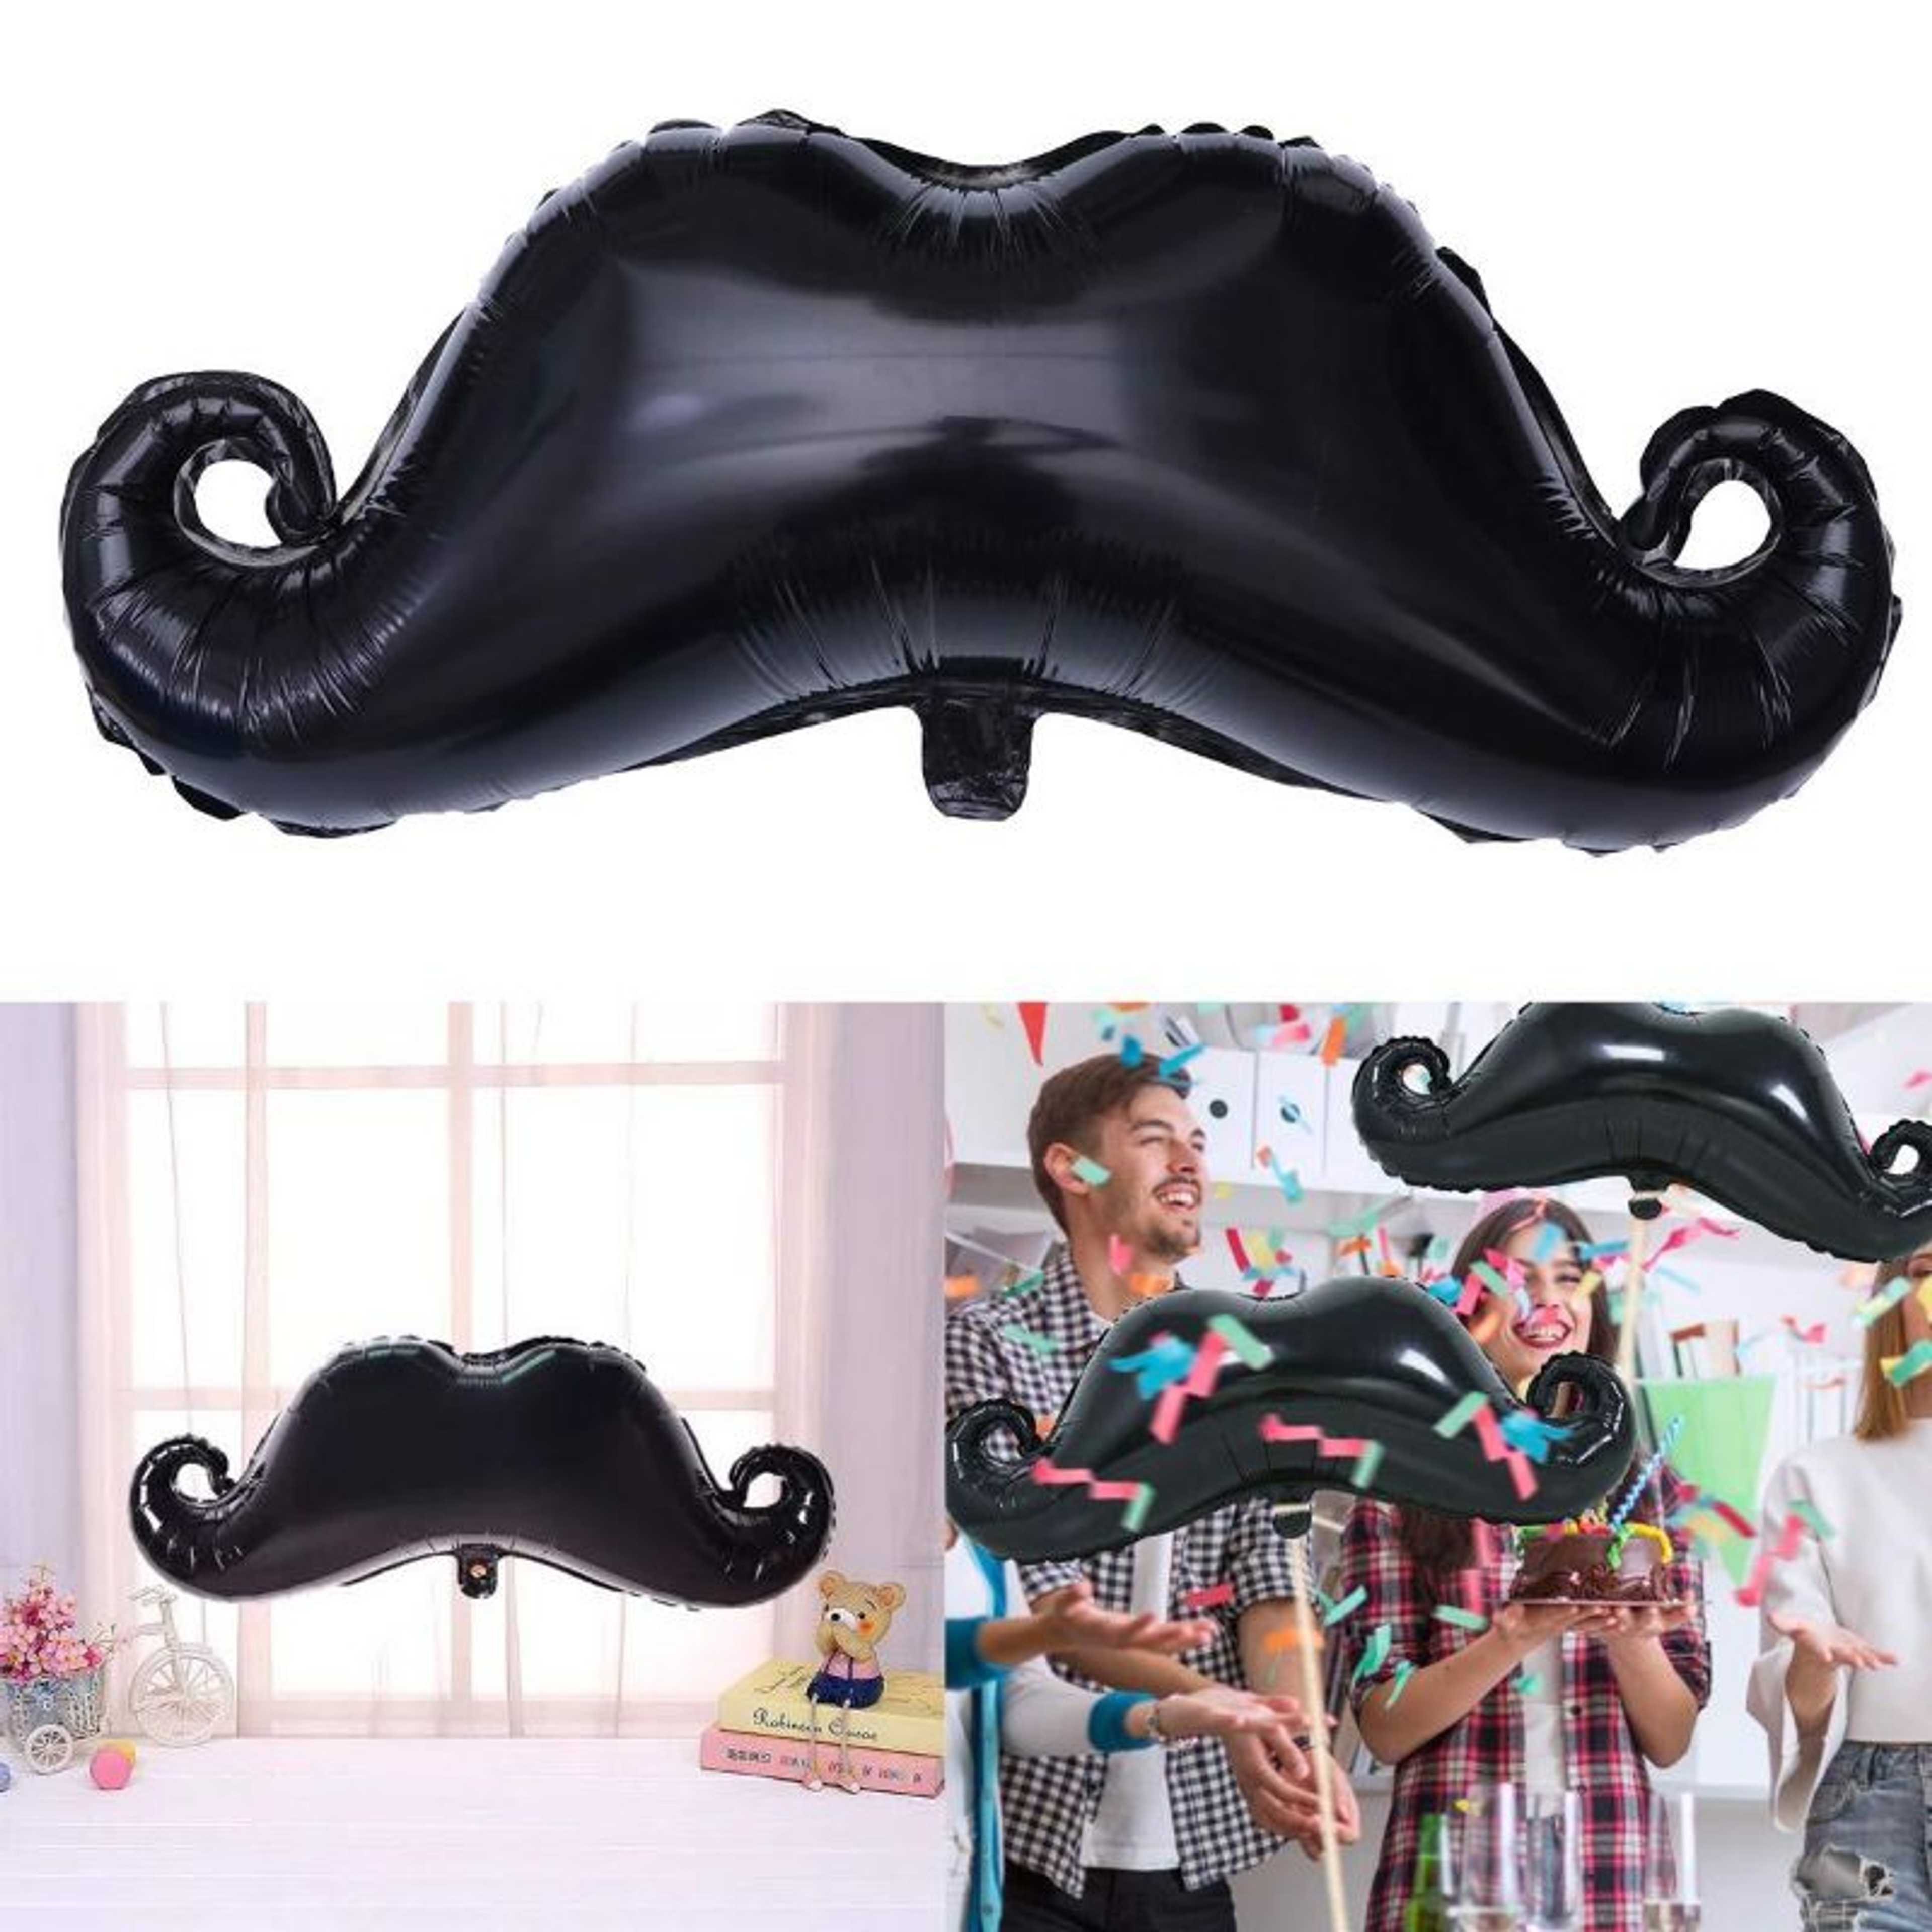 Mustache Foil Balloon Large 35 Inches Big Shape Helium Balloons Birthday Party Pipe To Inflate Included Unbeatable Low Price Guarantee